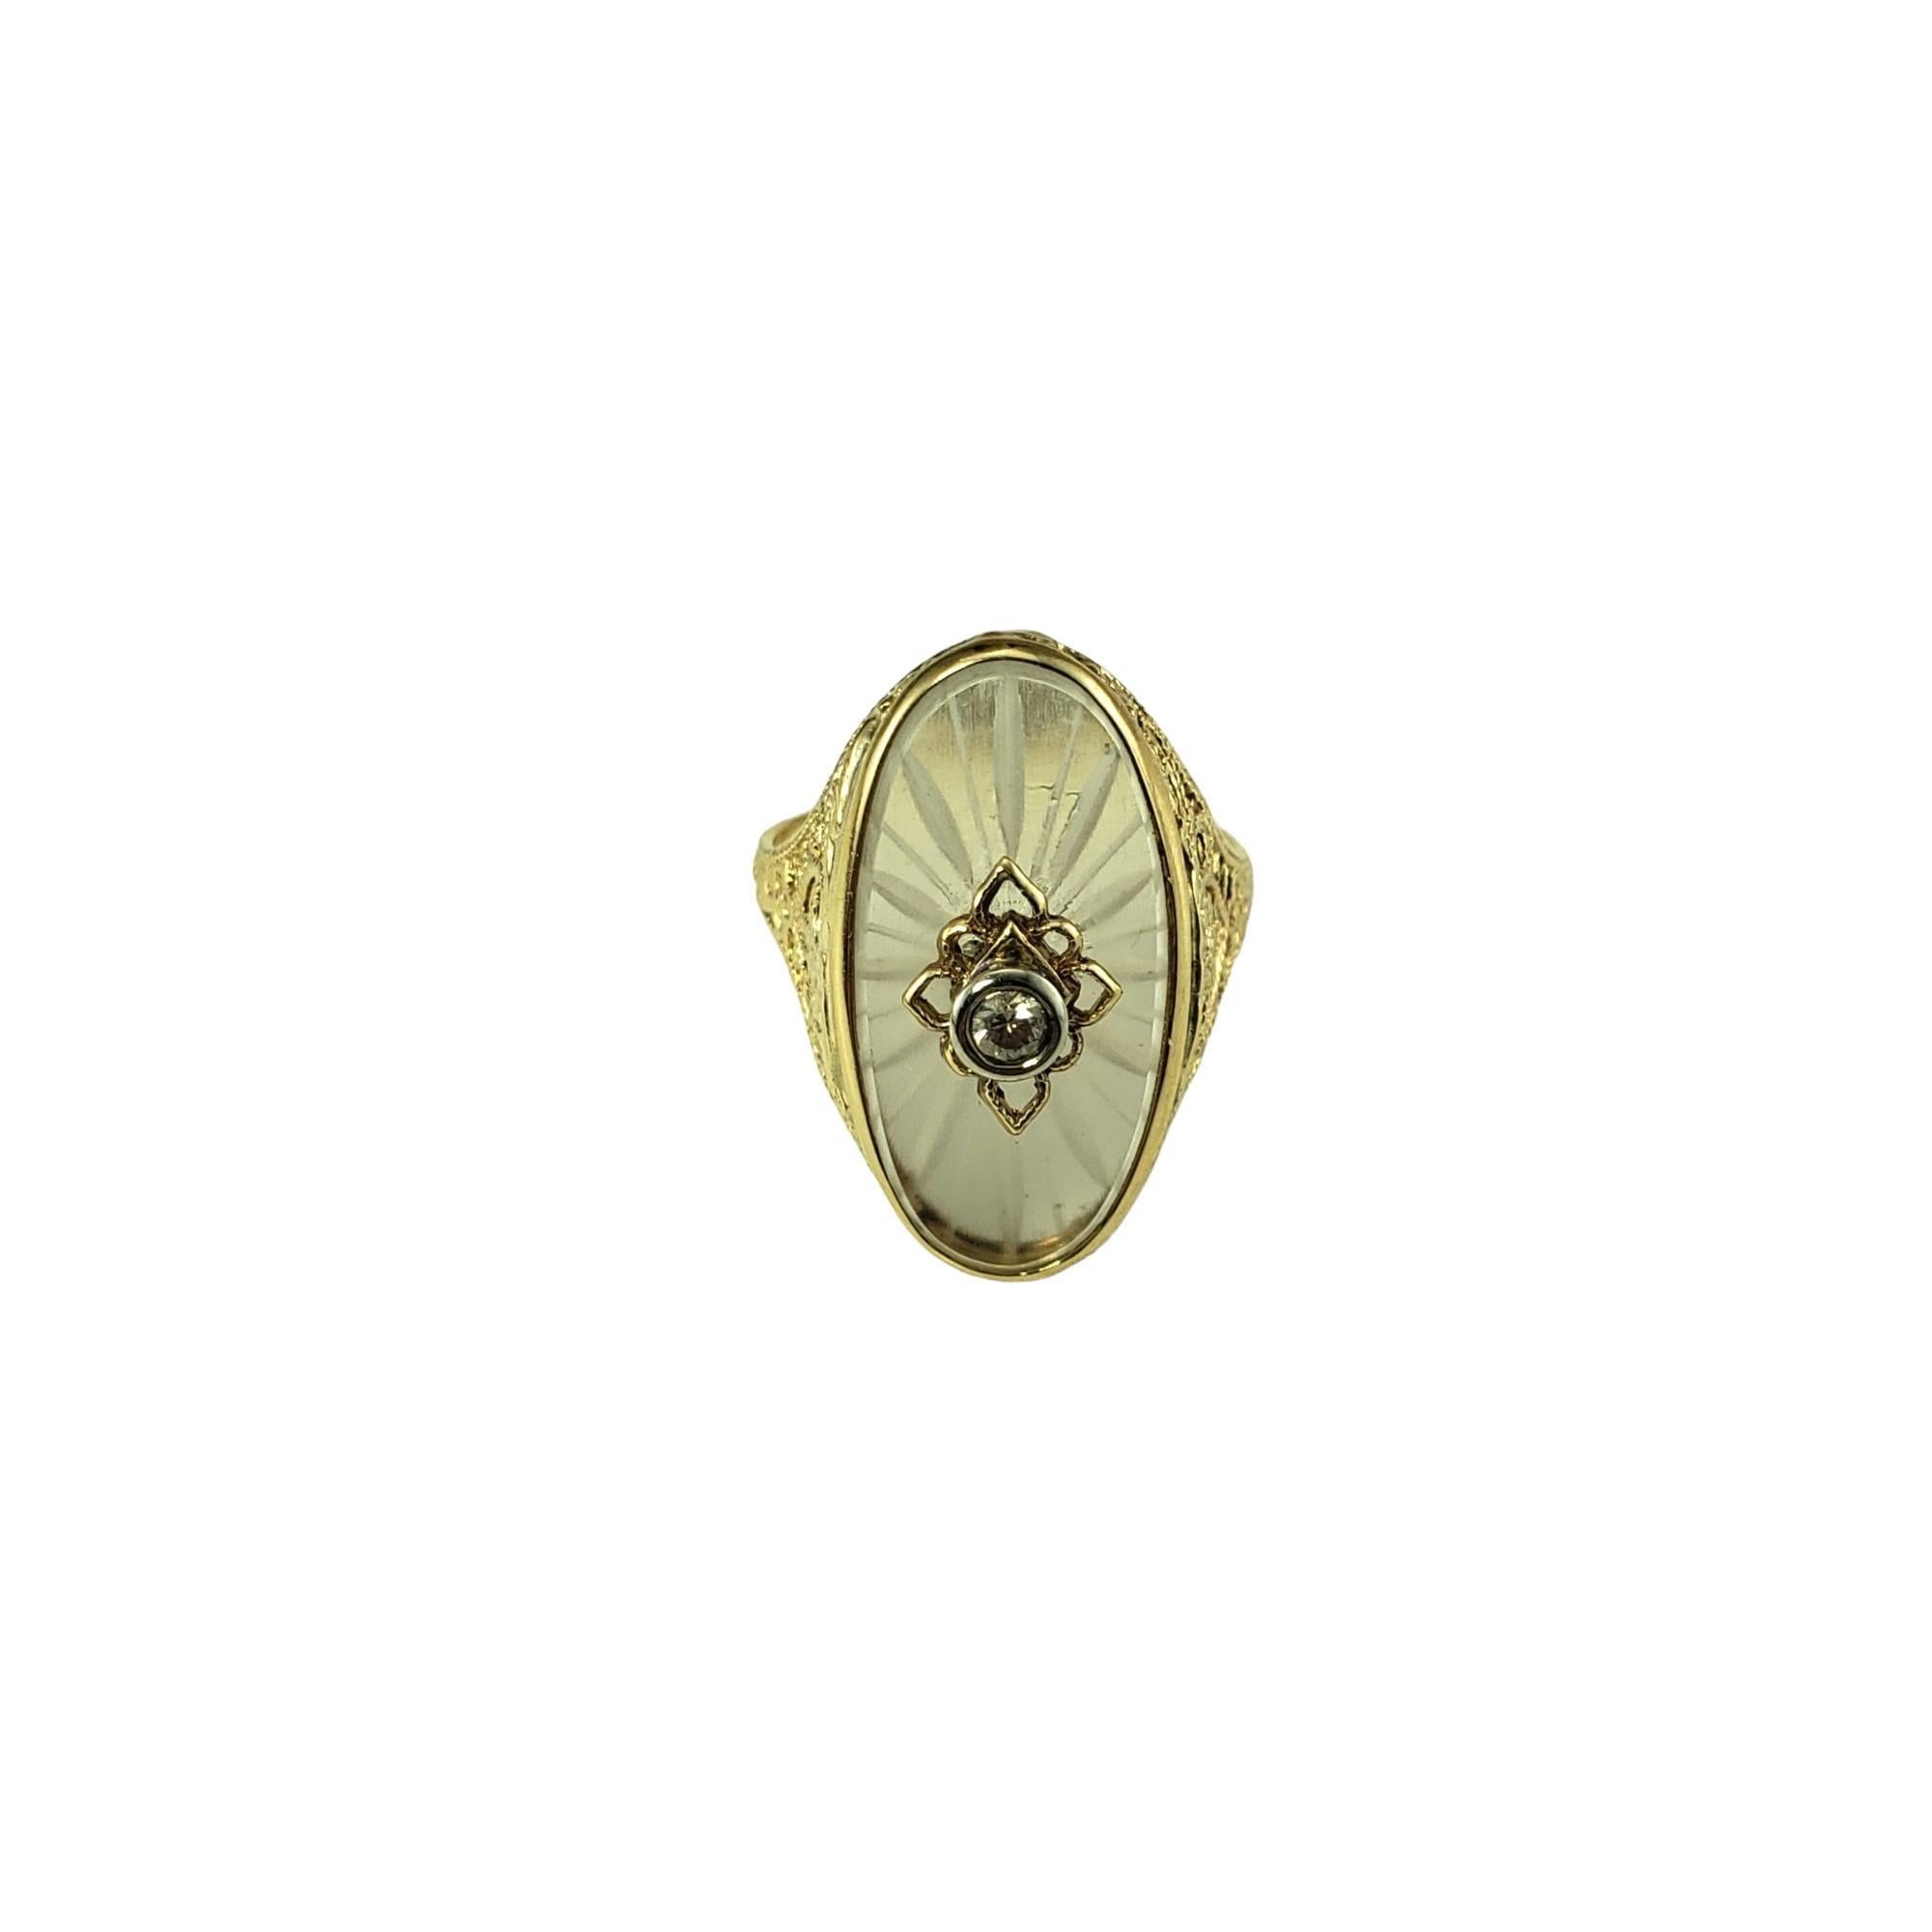 Vintage 14K Yellow Gold Camphor Glass and Diamond Ring Size 5.75-

This elegant ring features cut camphor glass and one round brilliant cut diamond set in beautifully detailed yellow gold.  Top of ring measures 20 mm x 13 mm.  Shank: 2